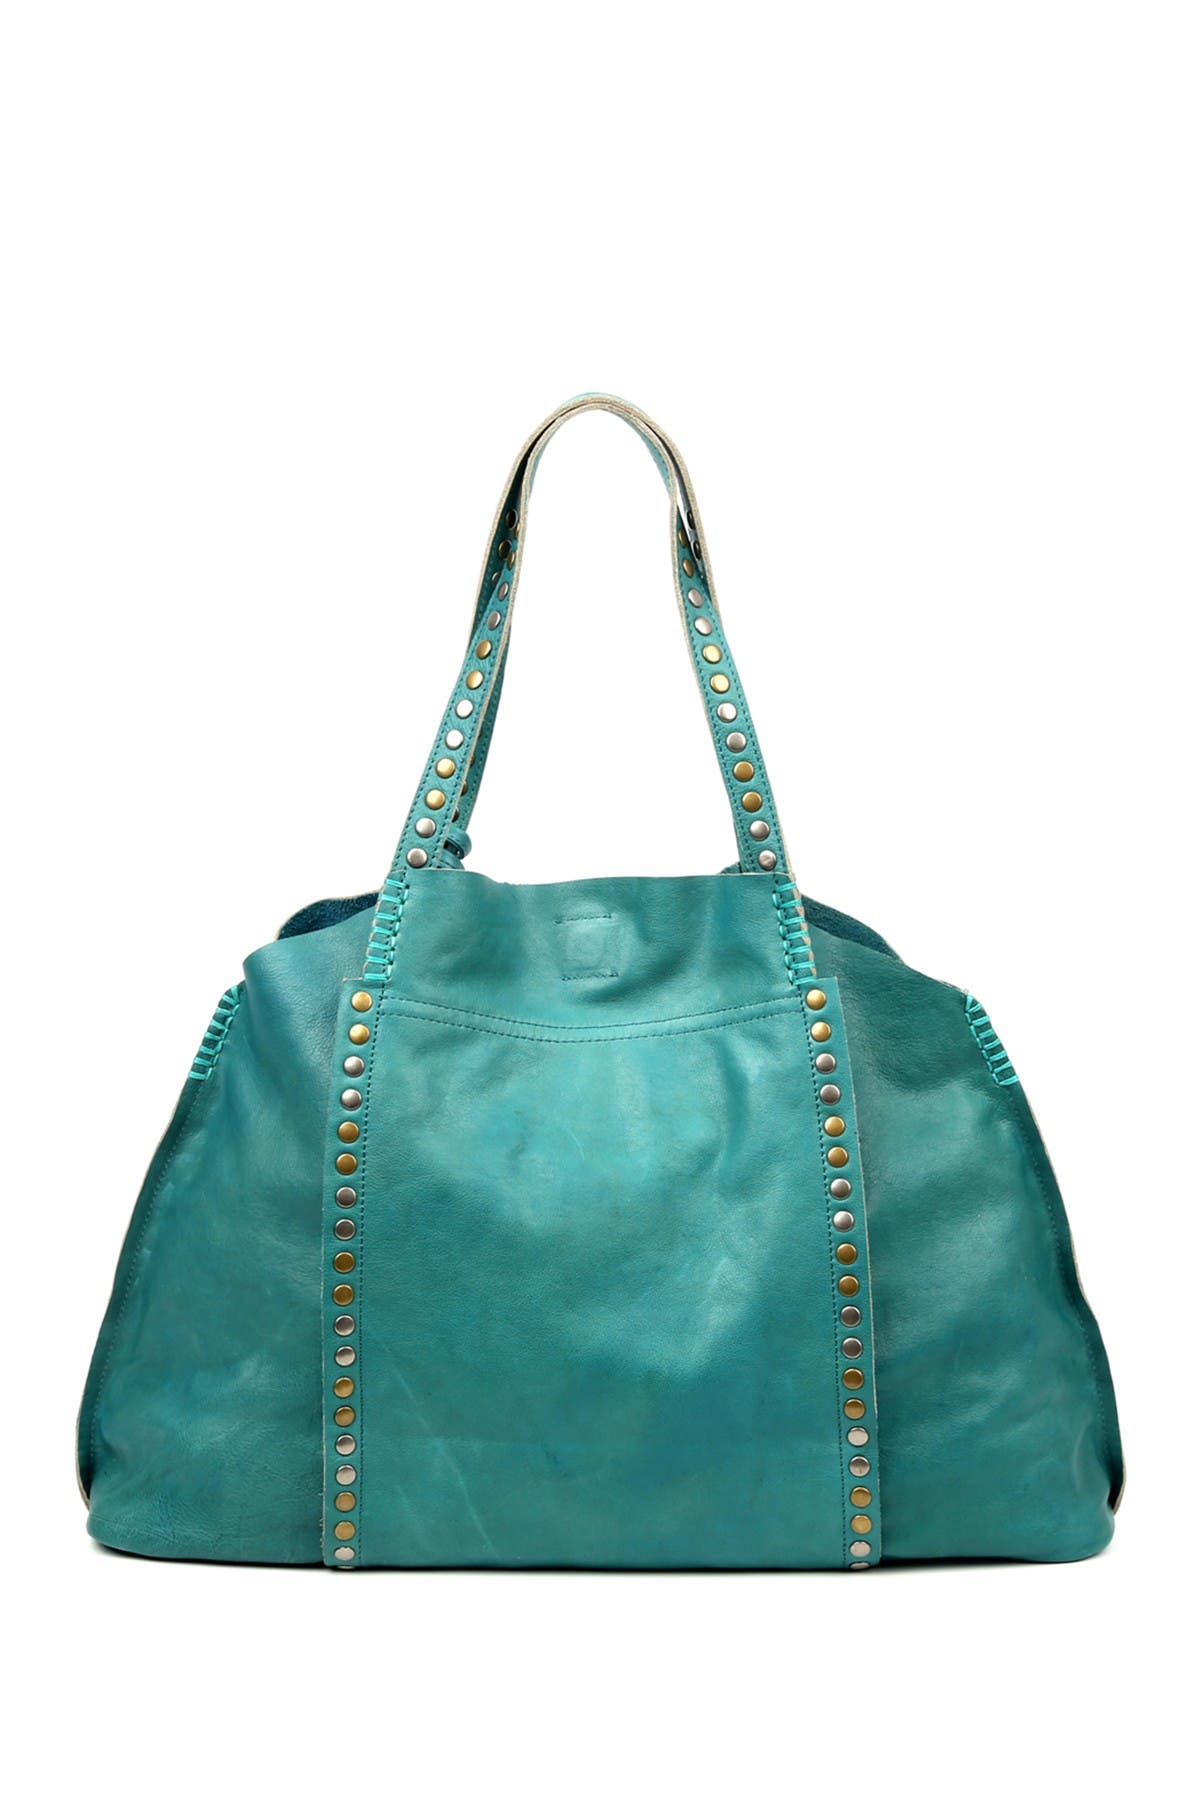 Old Trend Birch Leather Tote Bag In Turquoise/aqua